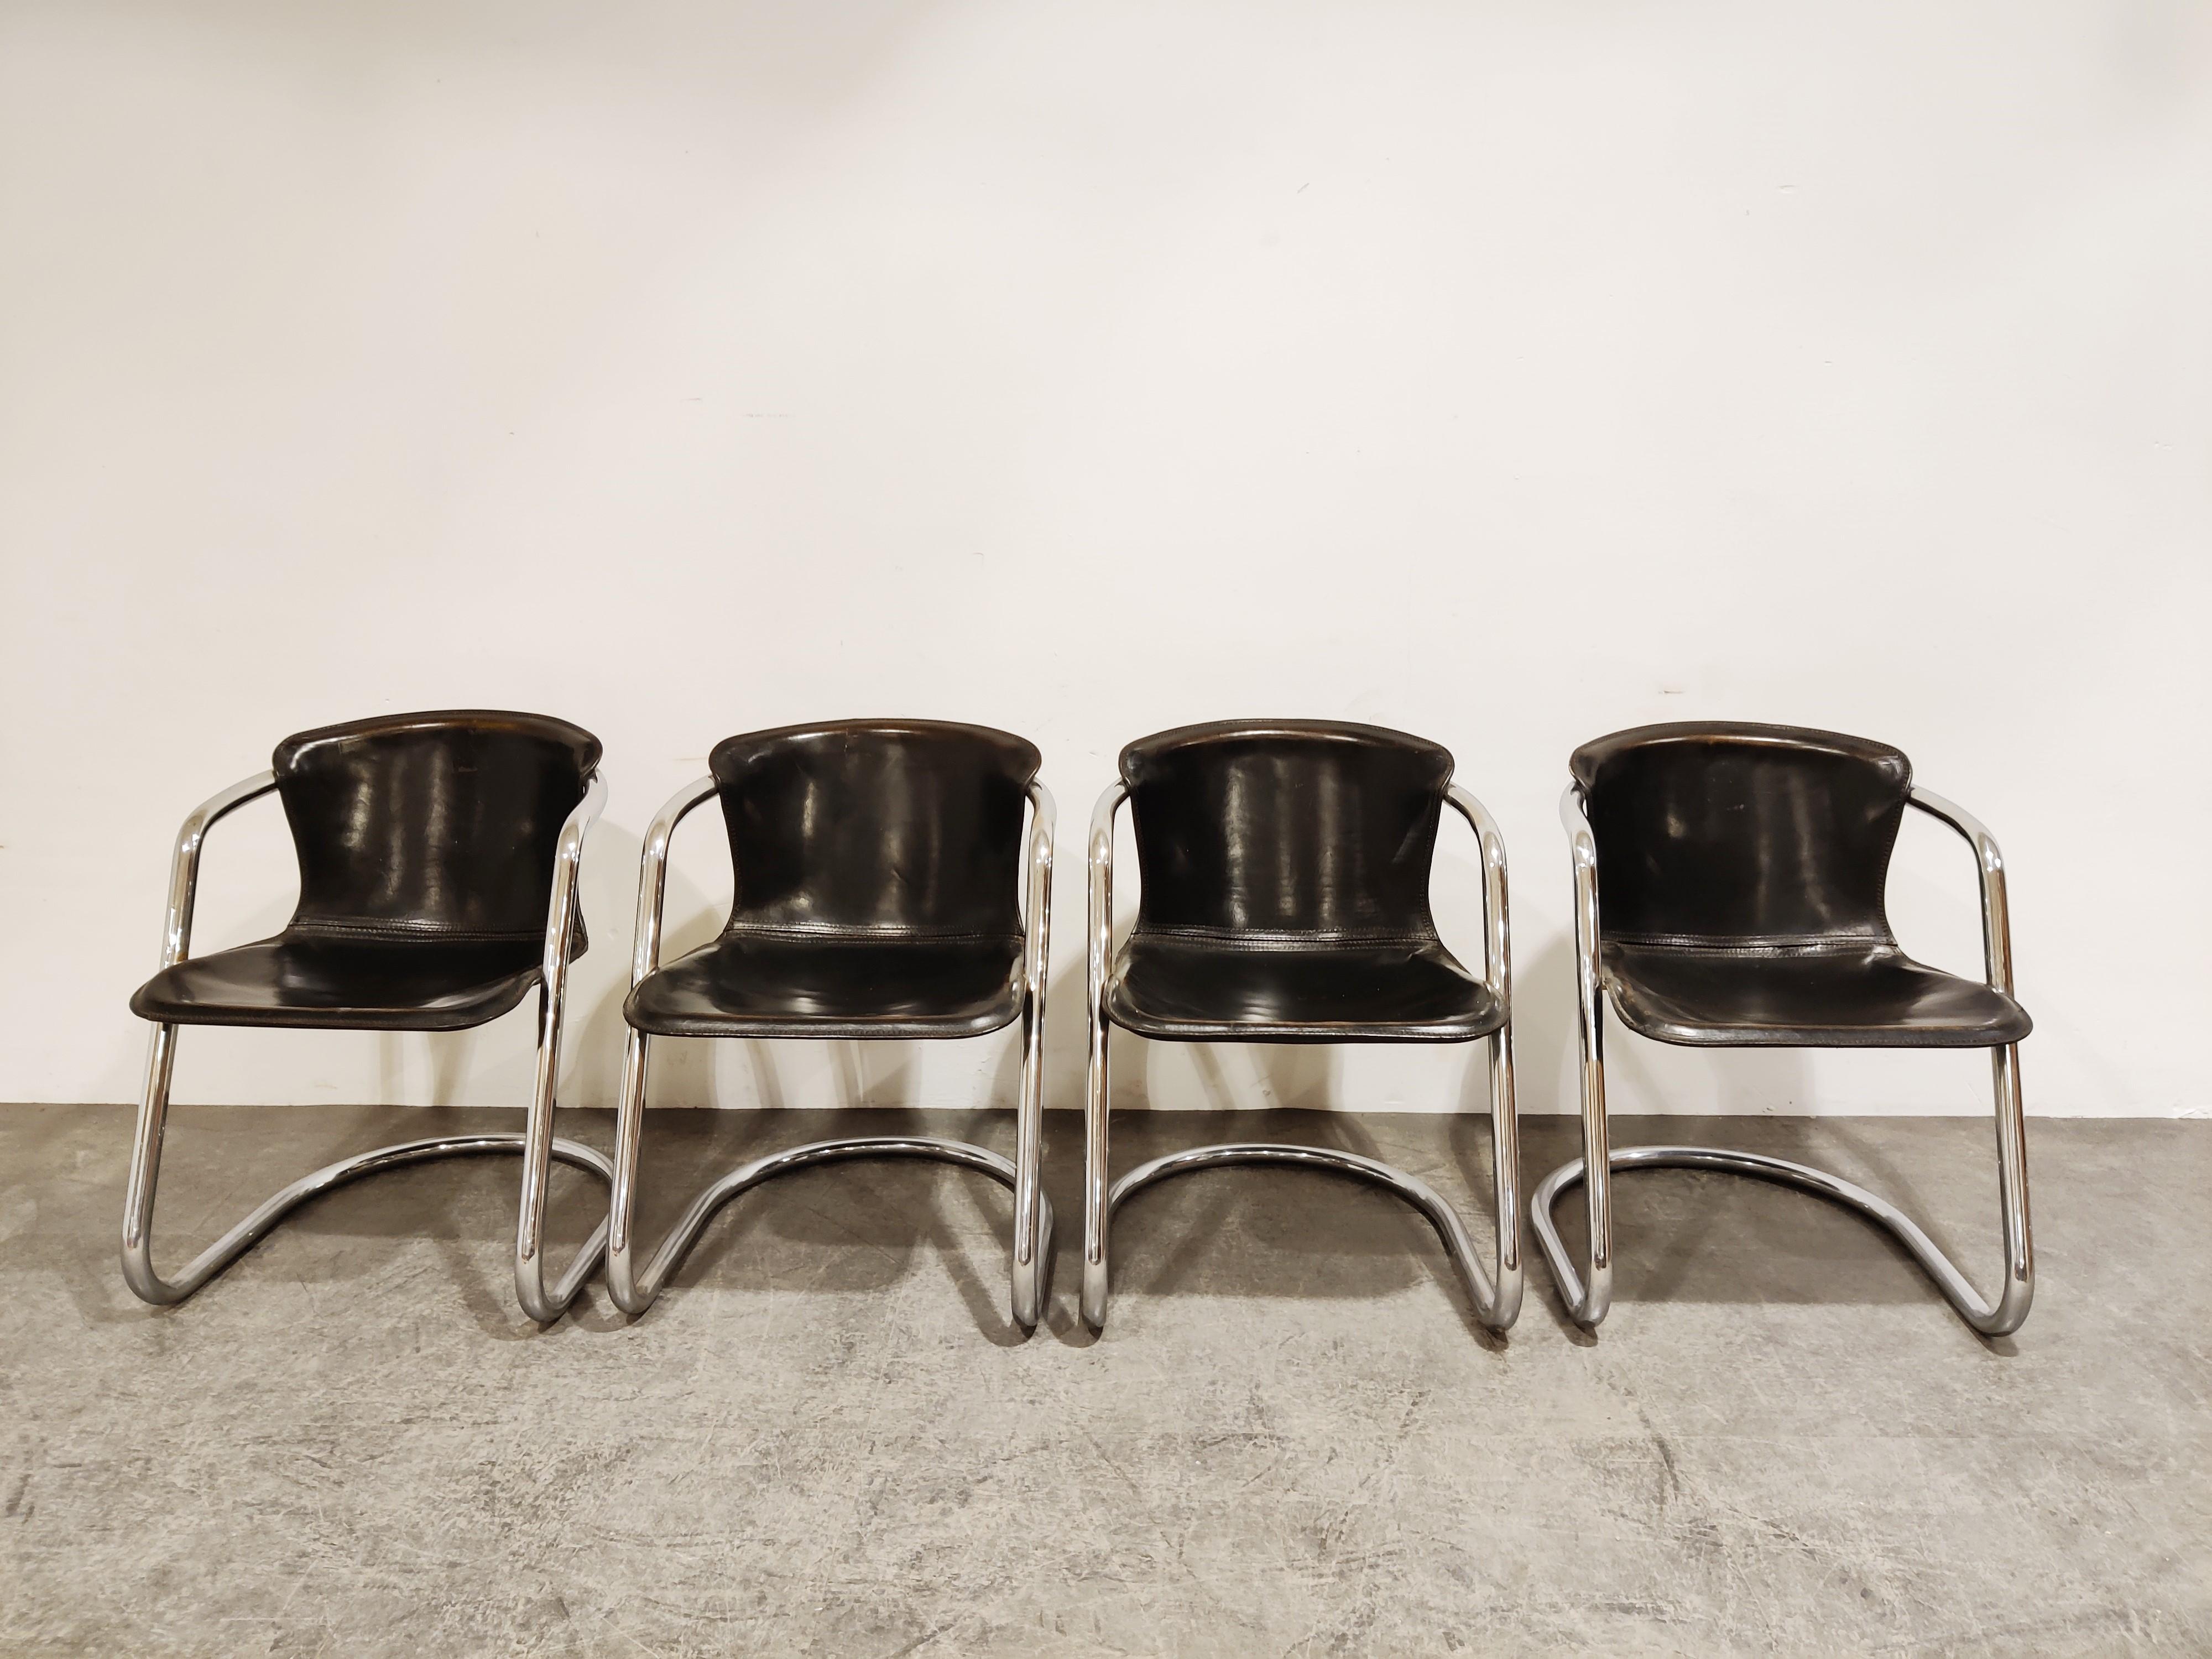 Set of 4 saddle leeather dining chairs designed by Willy Rizzo for Cidue..

The chairs have a beautifully shaped chrome frame and come with the original black leather seats.

Good condition.

This is a rare model.

The chairs still look up